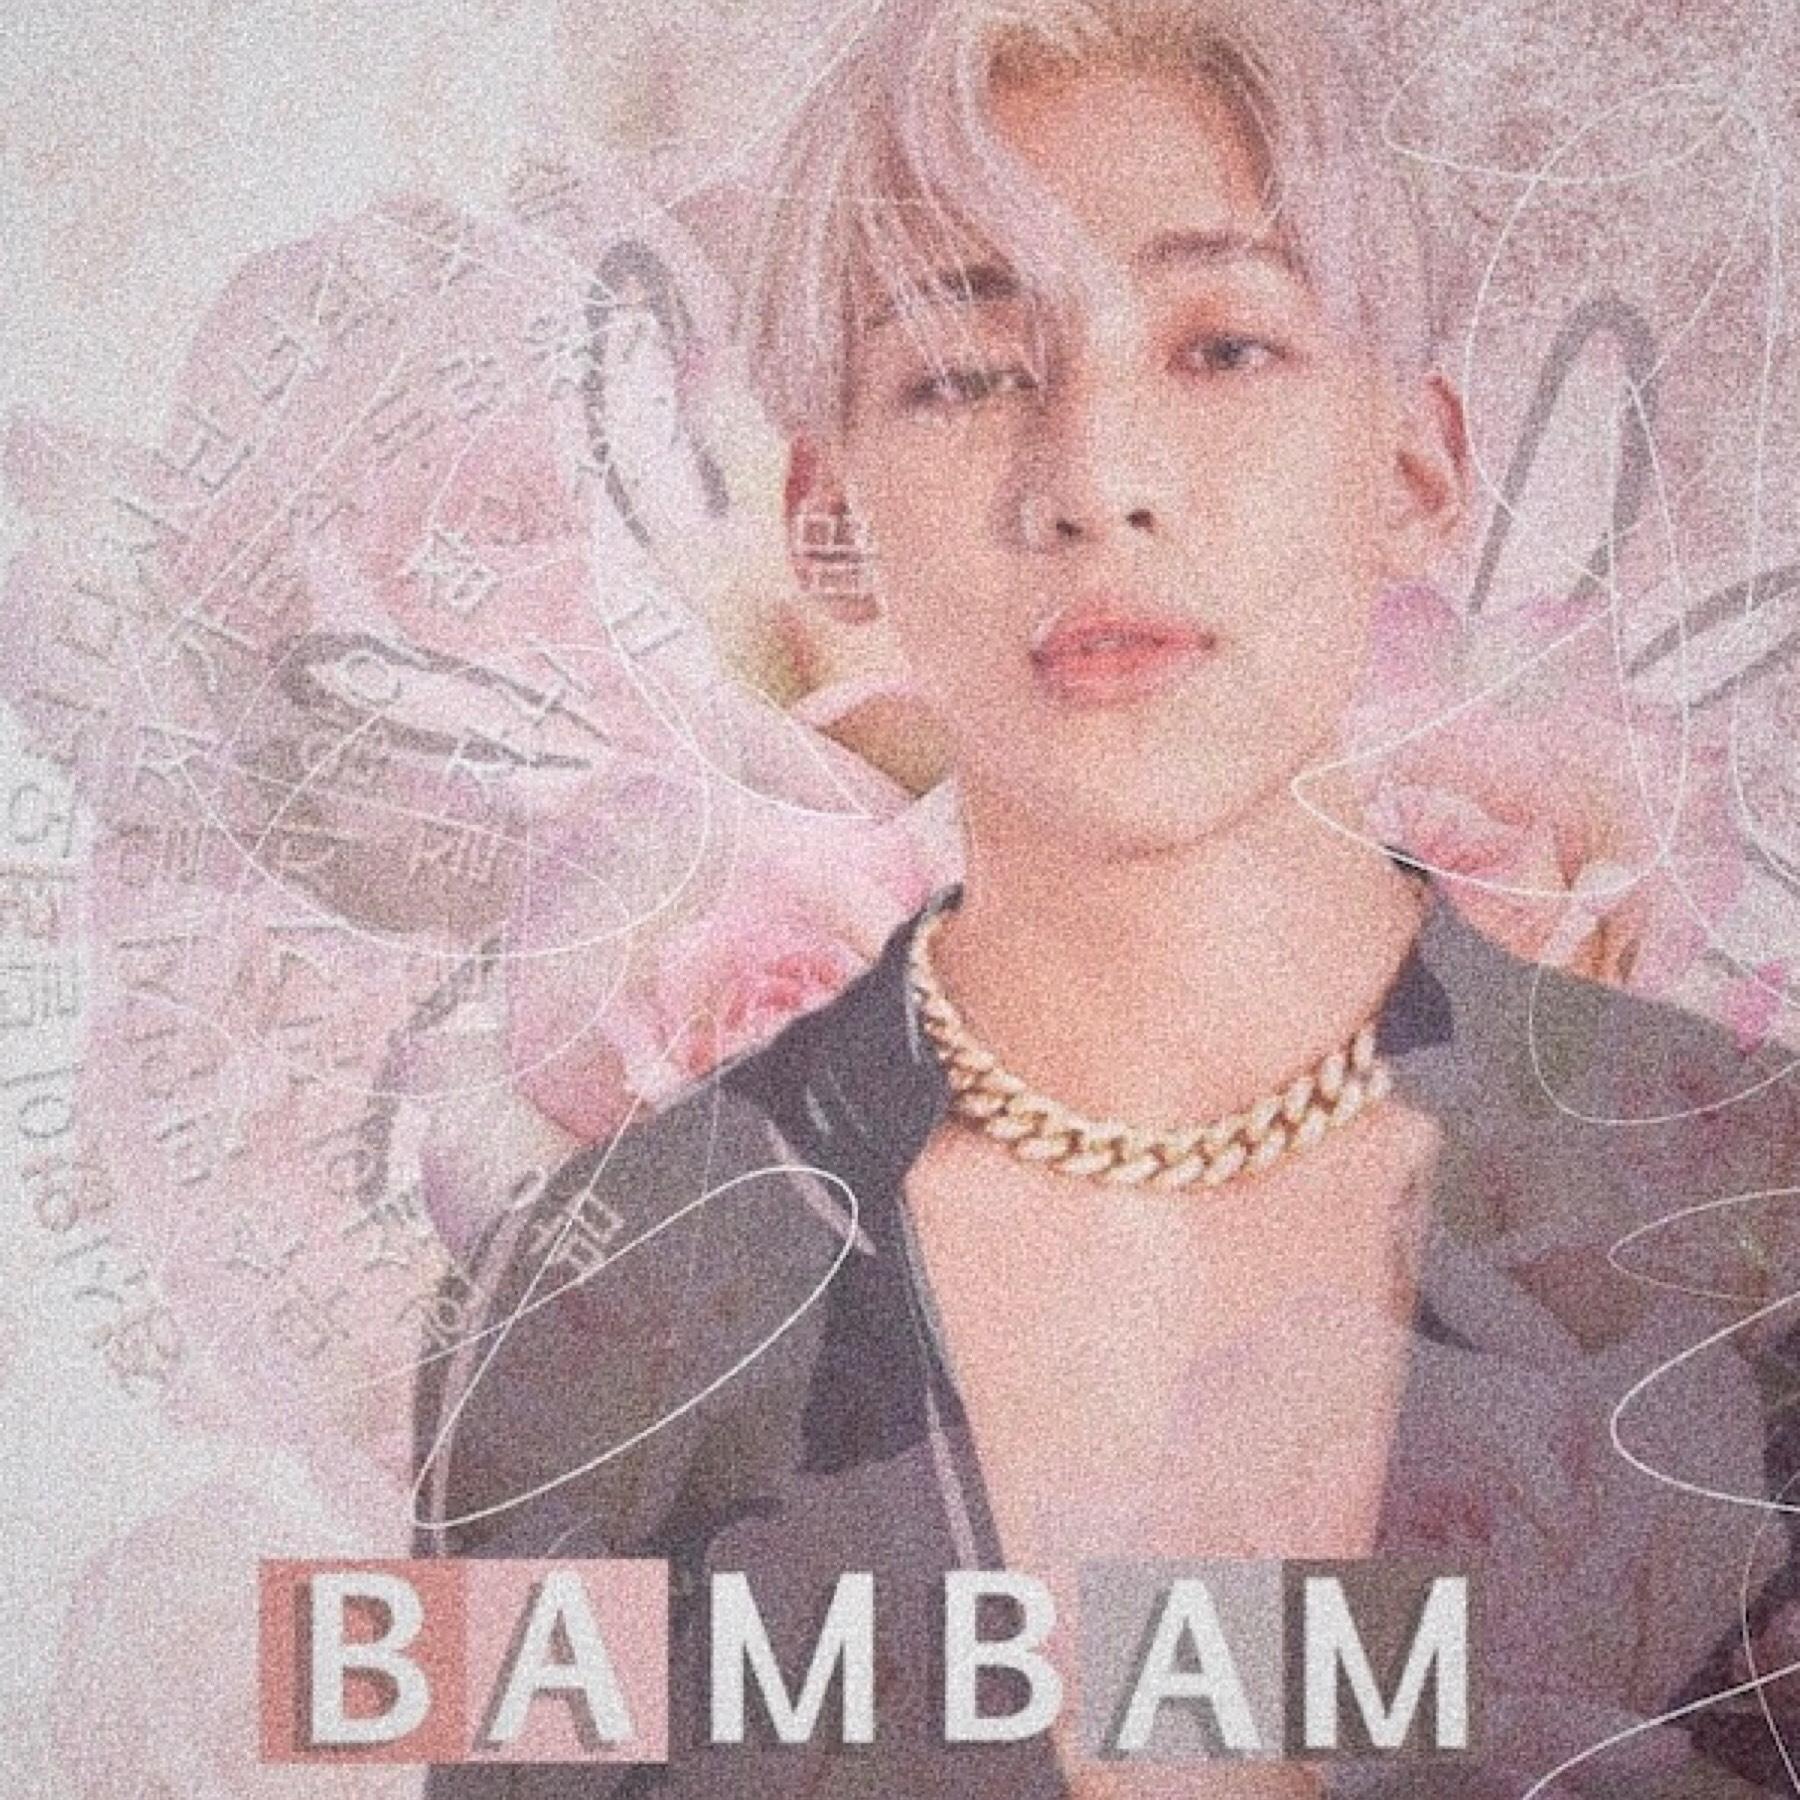 This is a pretty old edit I made like back around the same time as the baekhyun one but I felt like I should post something so here it is :)